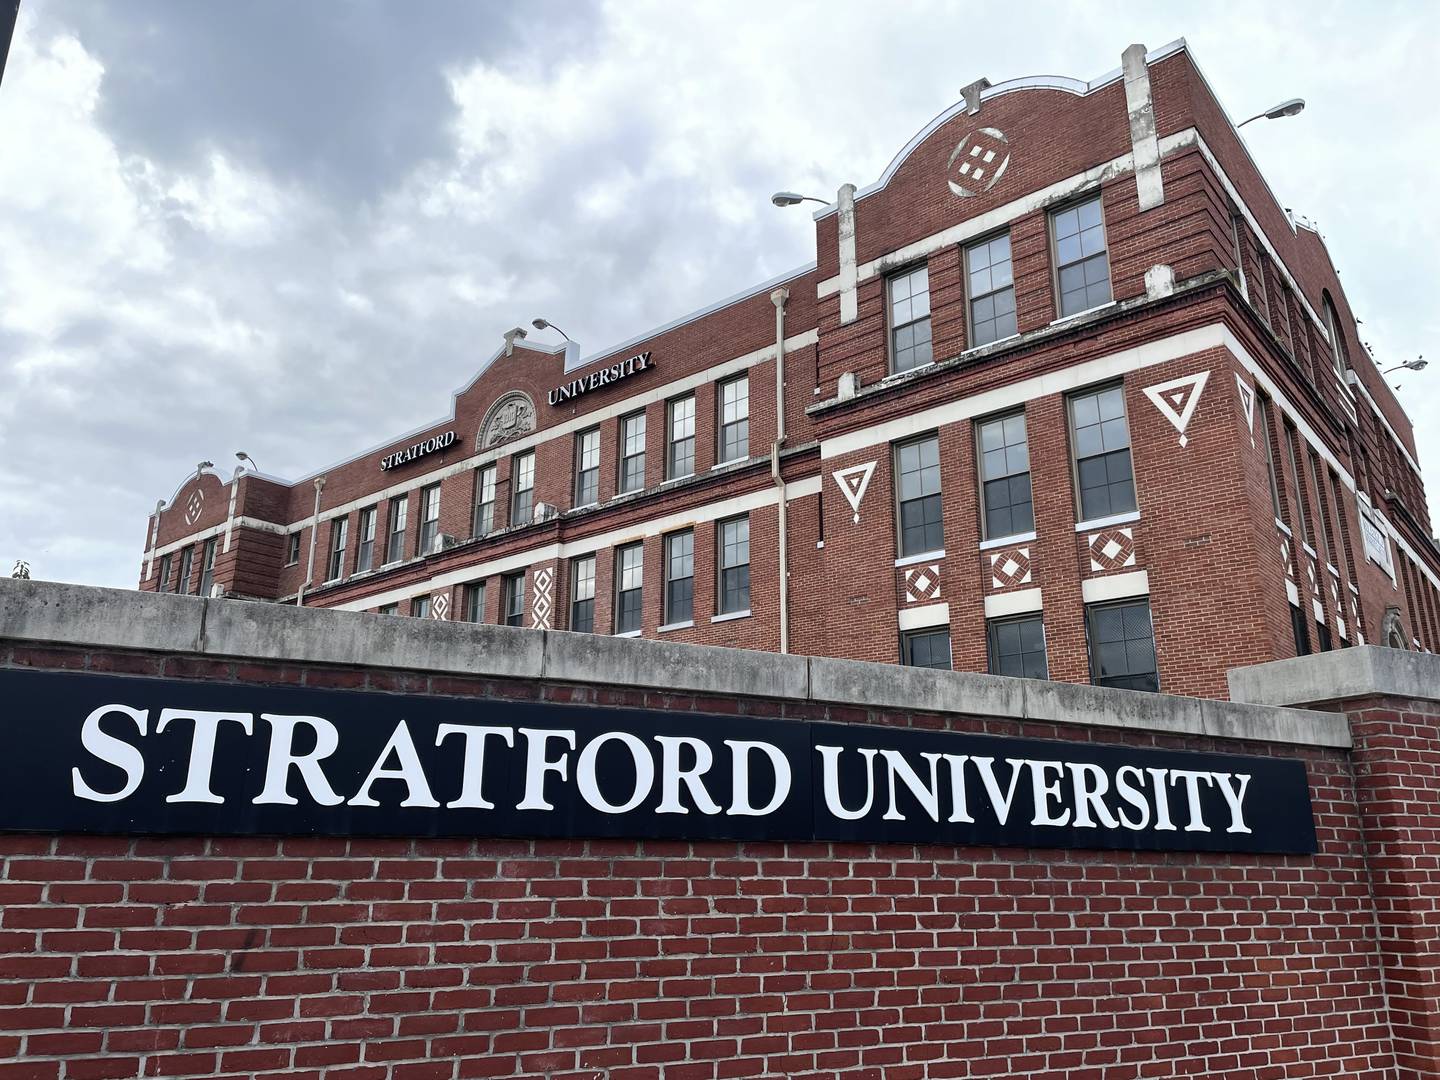 The Baltimore campus of Stratford University. The for-profit university closed its doors, leaving students uncertain for their academic futures.